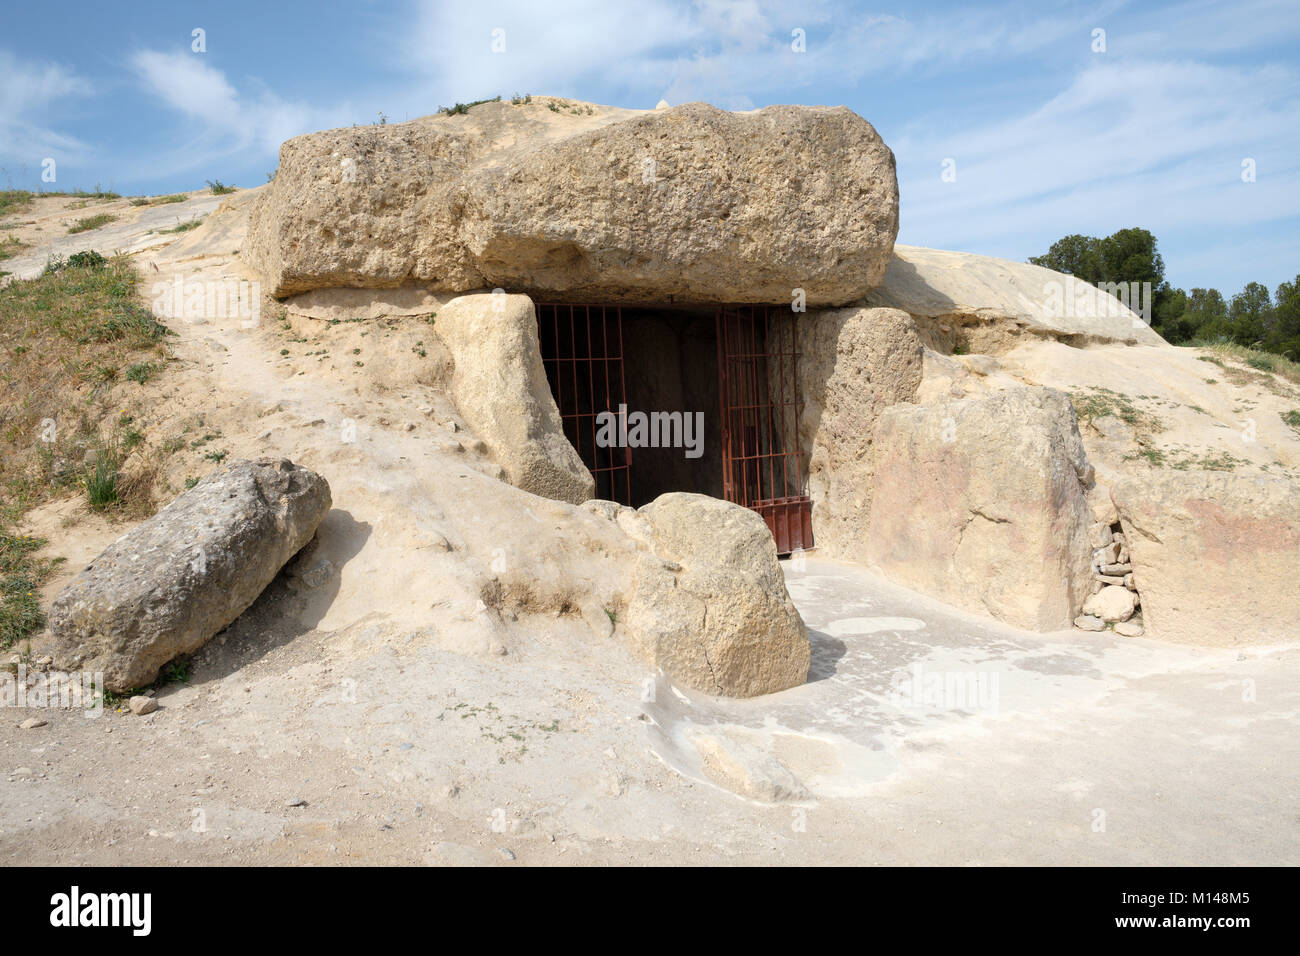 Entrance to the largest neolithic dolmen, long barrow in Europe, Dolmen de Menga, Antequera, Malaga, Andalusia, Spain. Stock Photo